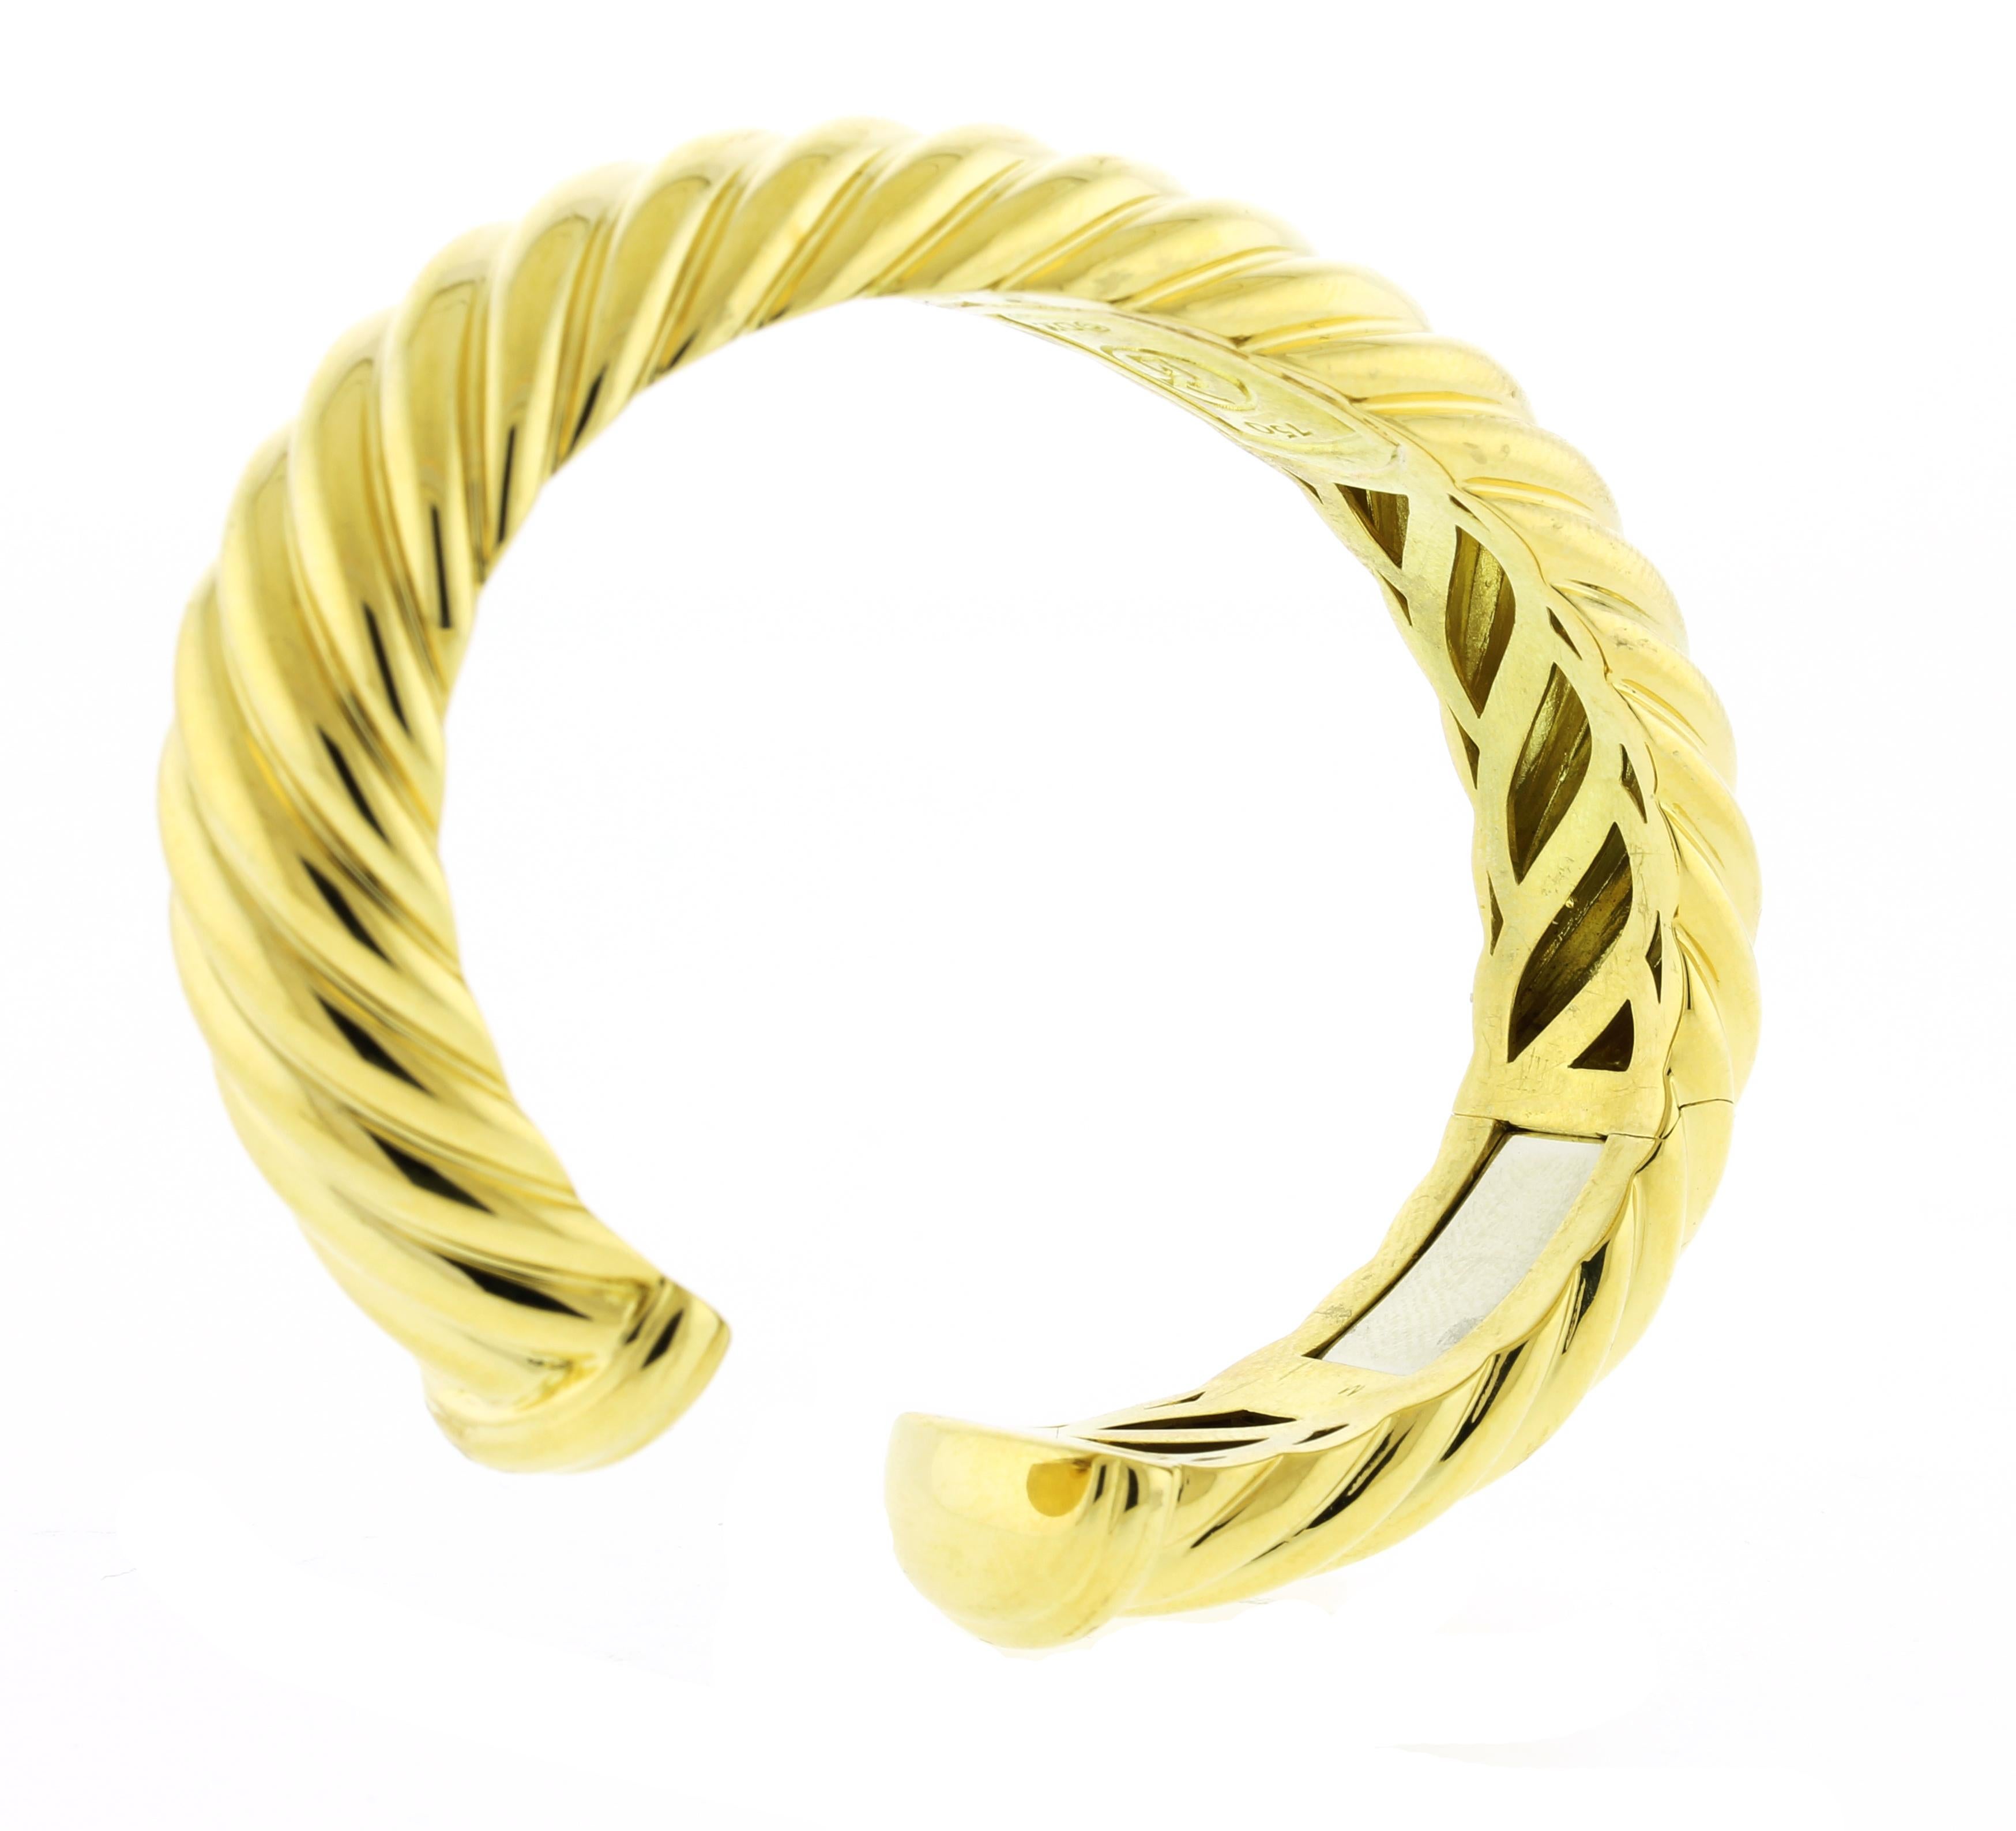 From David Yurman, this grooved bracelet is great for any occasion.
♦ Designer: David Yurman
♦ Metal: 18kt yellow gold 
♦ Inside Diameter: 2 1/4 by 1 5/8
♦ Weight =54 grams
♦ Pampillonia Presentation Box
♦ Condition: Excellent, pre-owned